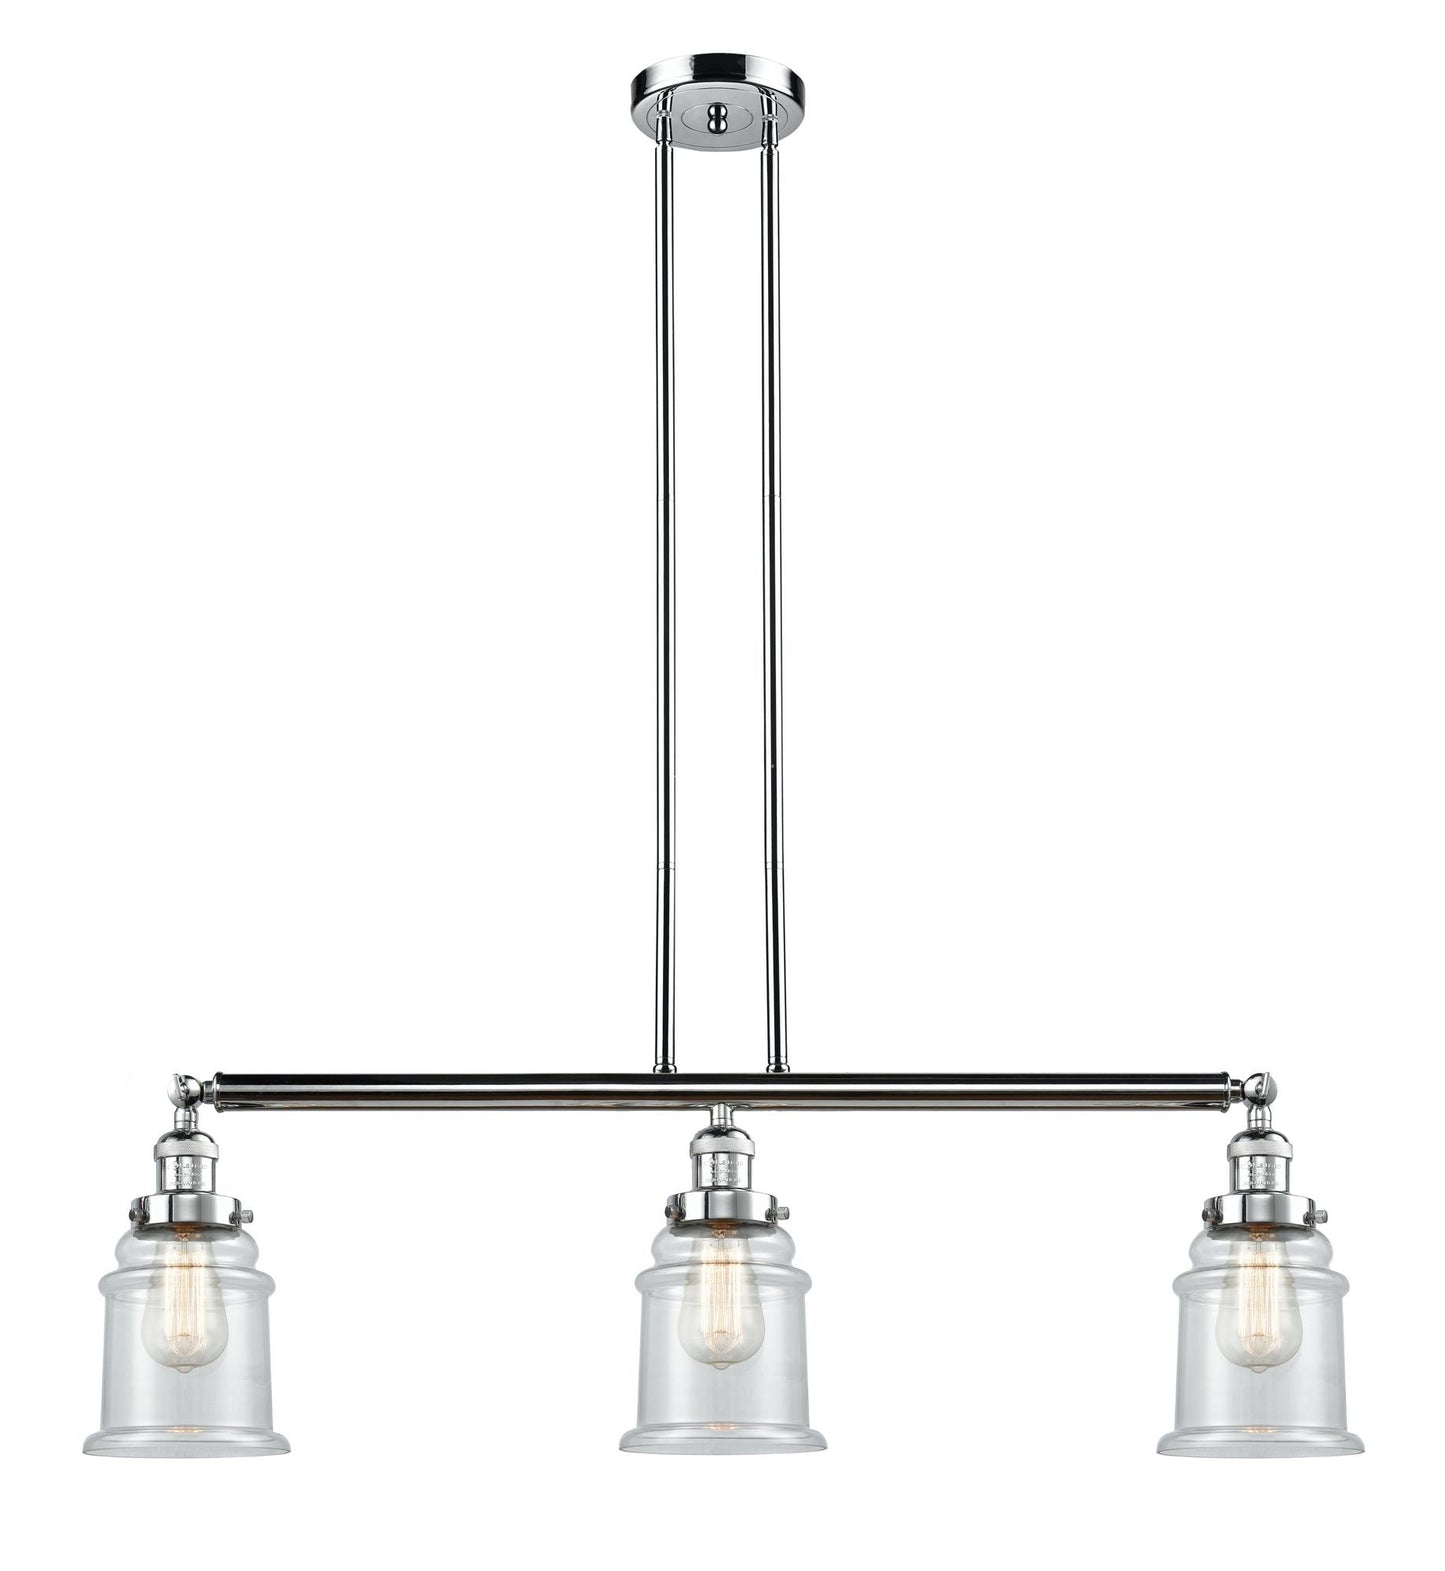 213-PC-G182 3-Light 38.5" Polished Chrome Island Light - Clear Canton Glass - LED Bulb - Dimmensions: 38.5 x 6 x 11<br>Minimum Height : 21.5<br>Maximum Height : 45.5 - Sloped Ceiling Compatible: Yes